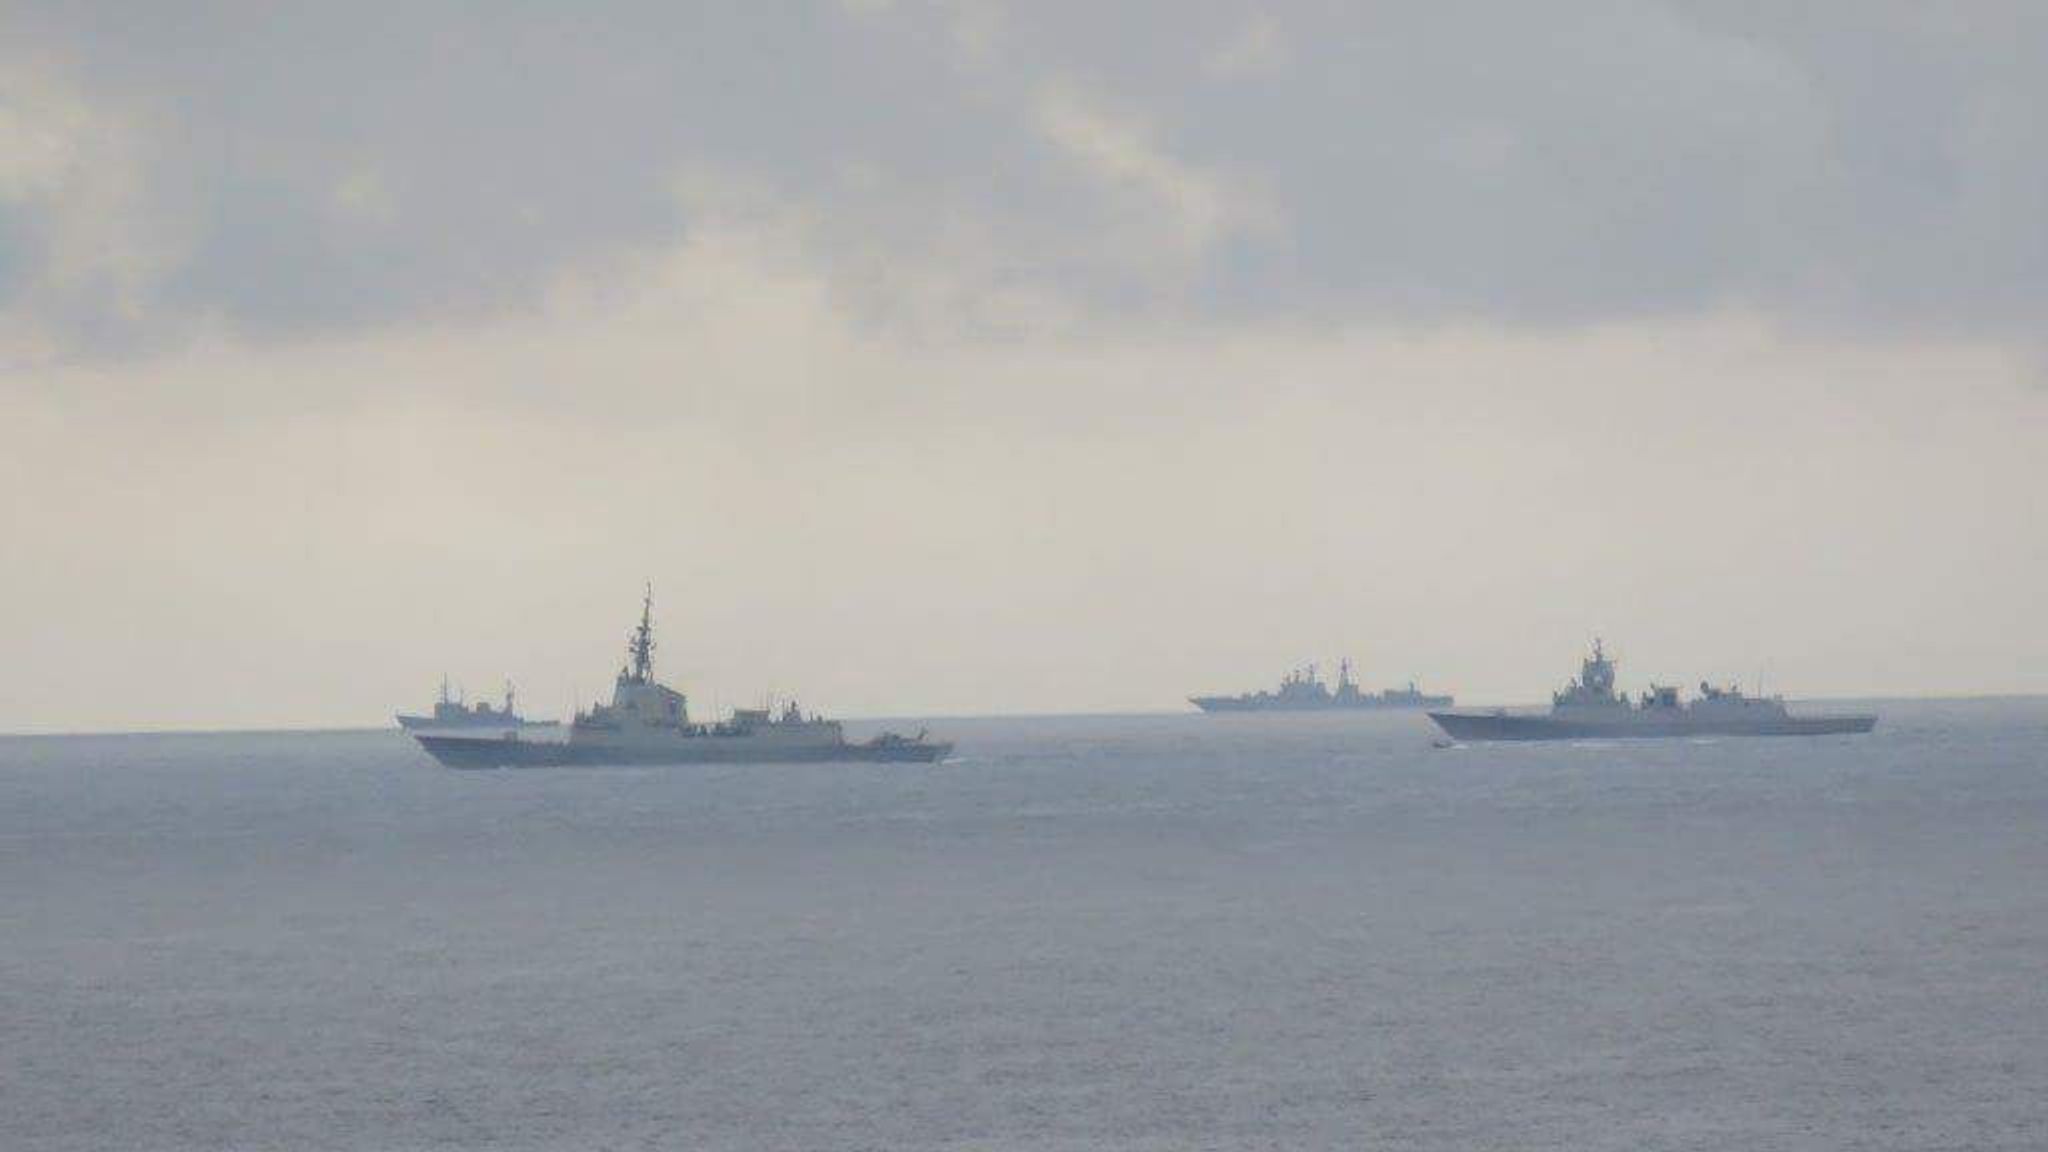 Russian warships sail through English Channel shadowed by Royal Navy ...